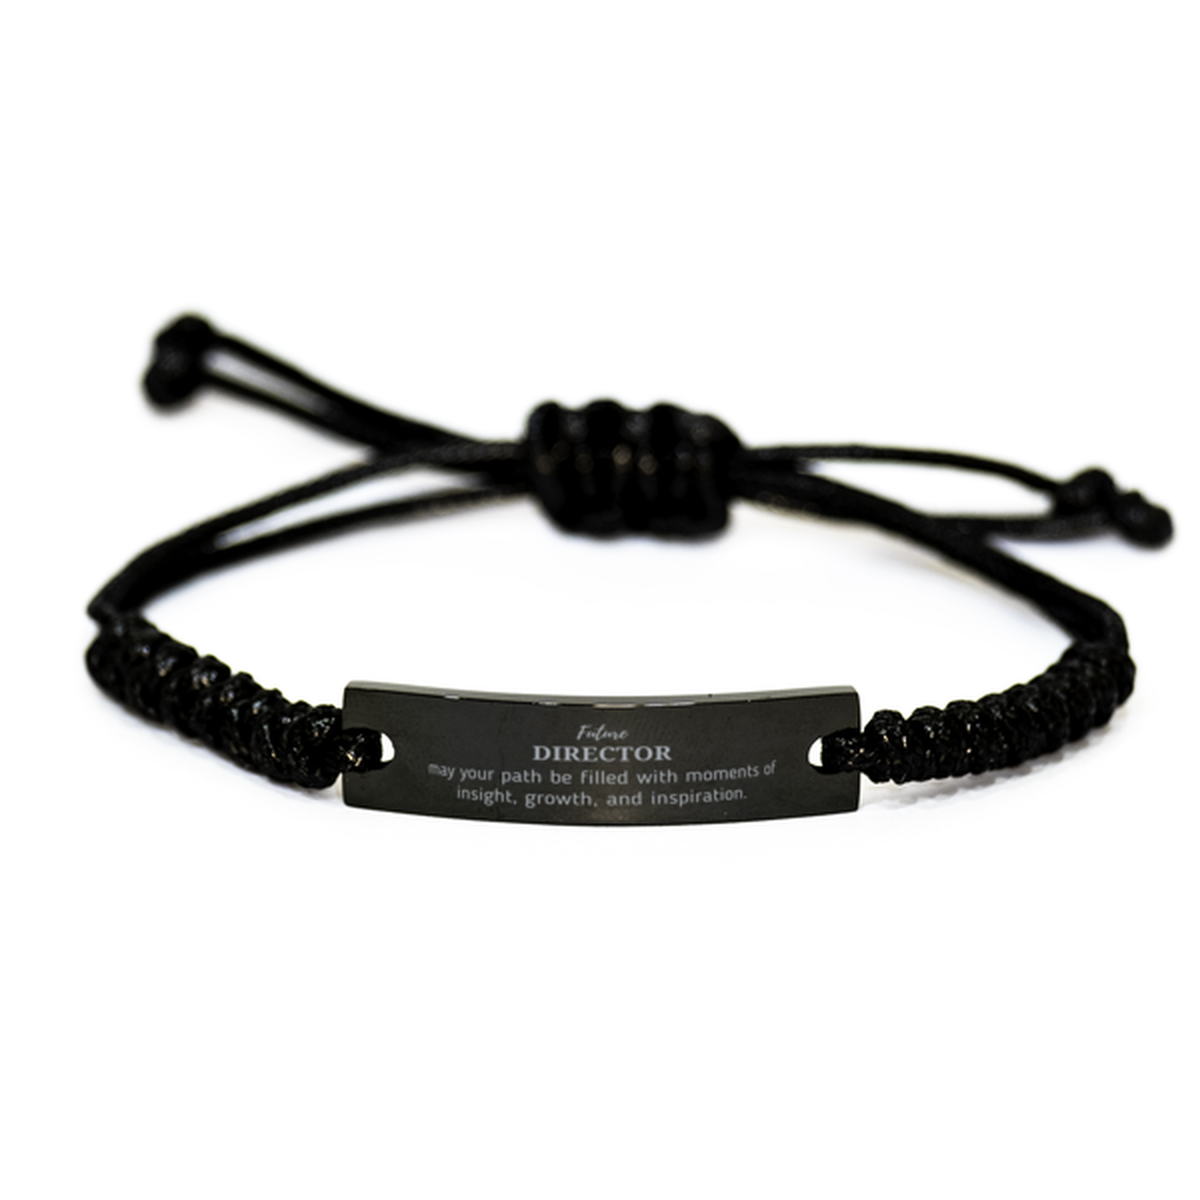 Future Director Gifts, May your path be filled with moments of insight, Graduation Gifts for New Director, Christmas Unique Black Rope Bracelet For Men, Women, Friends